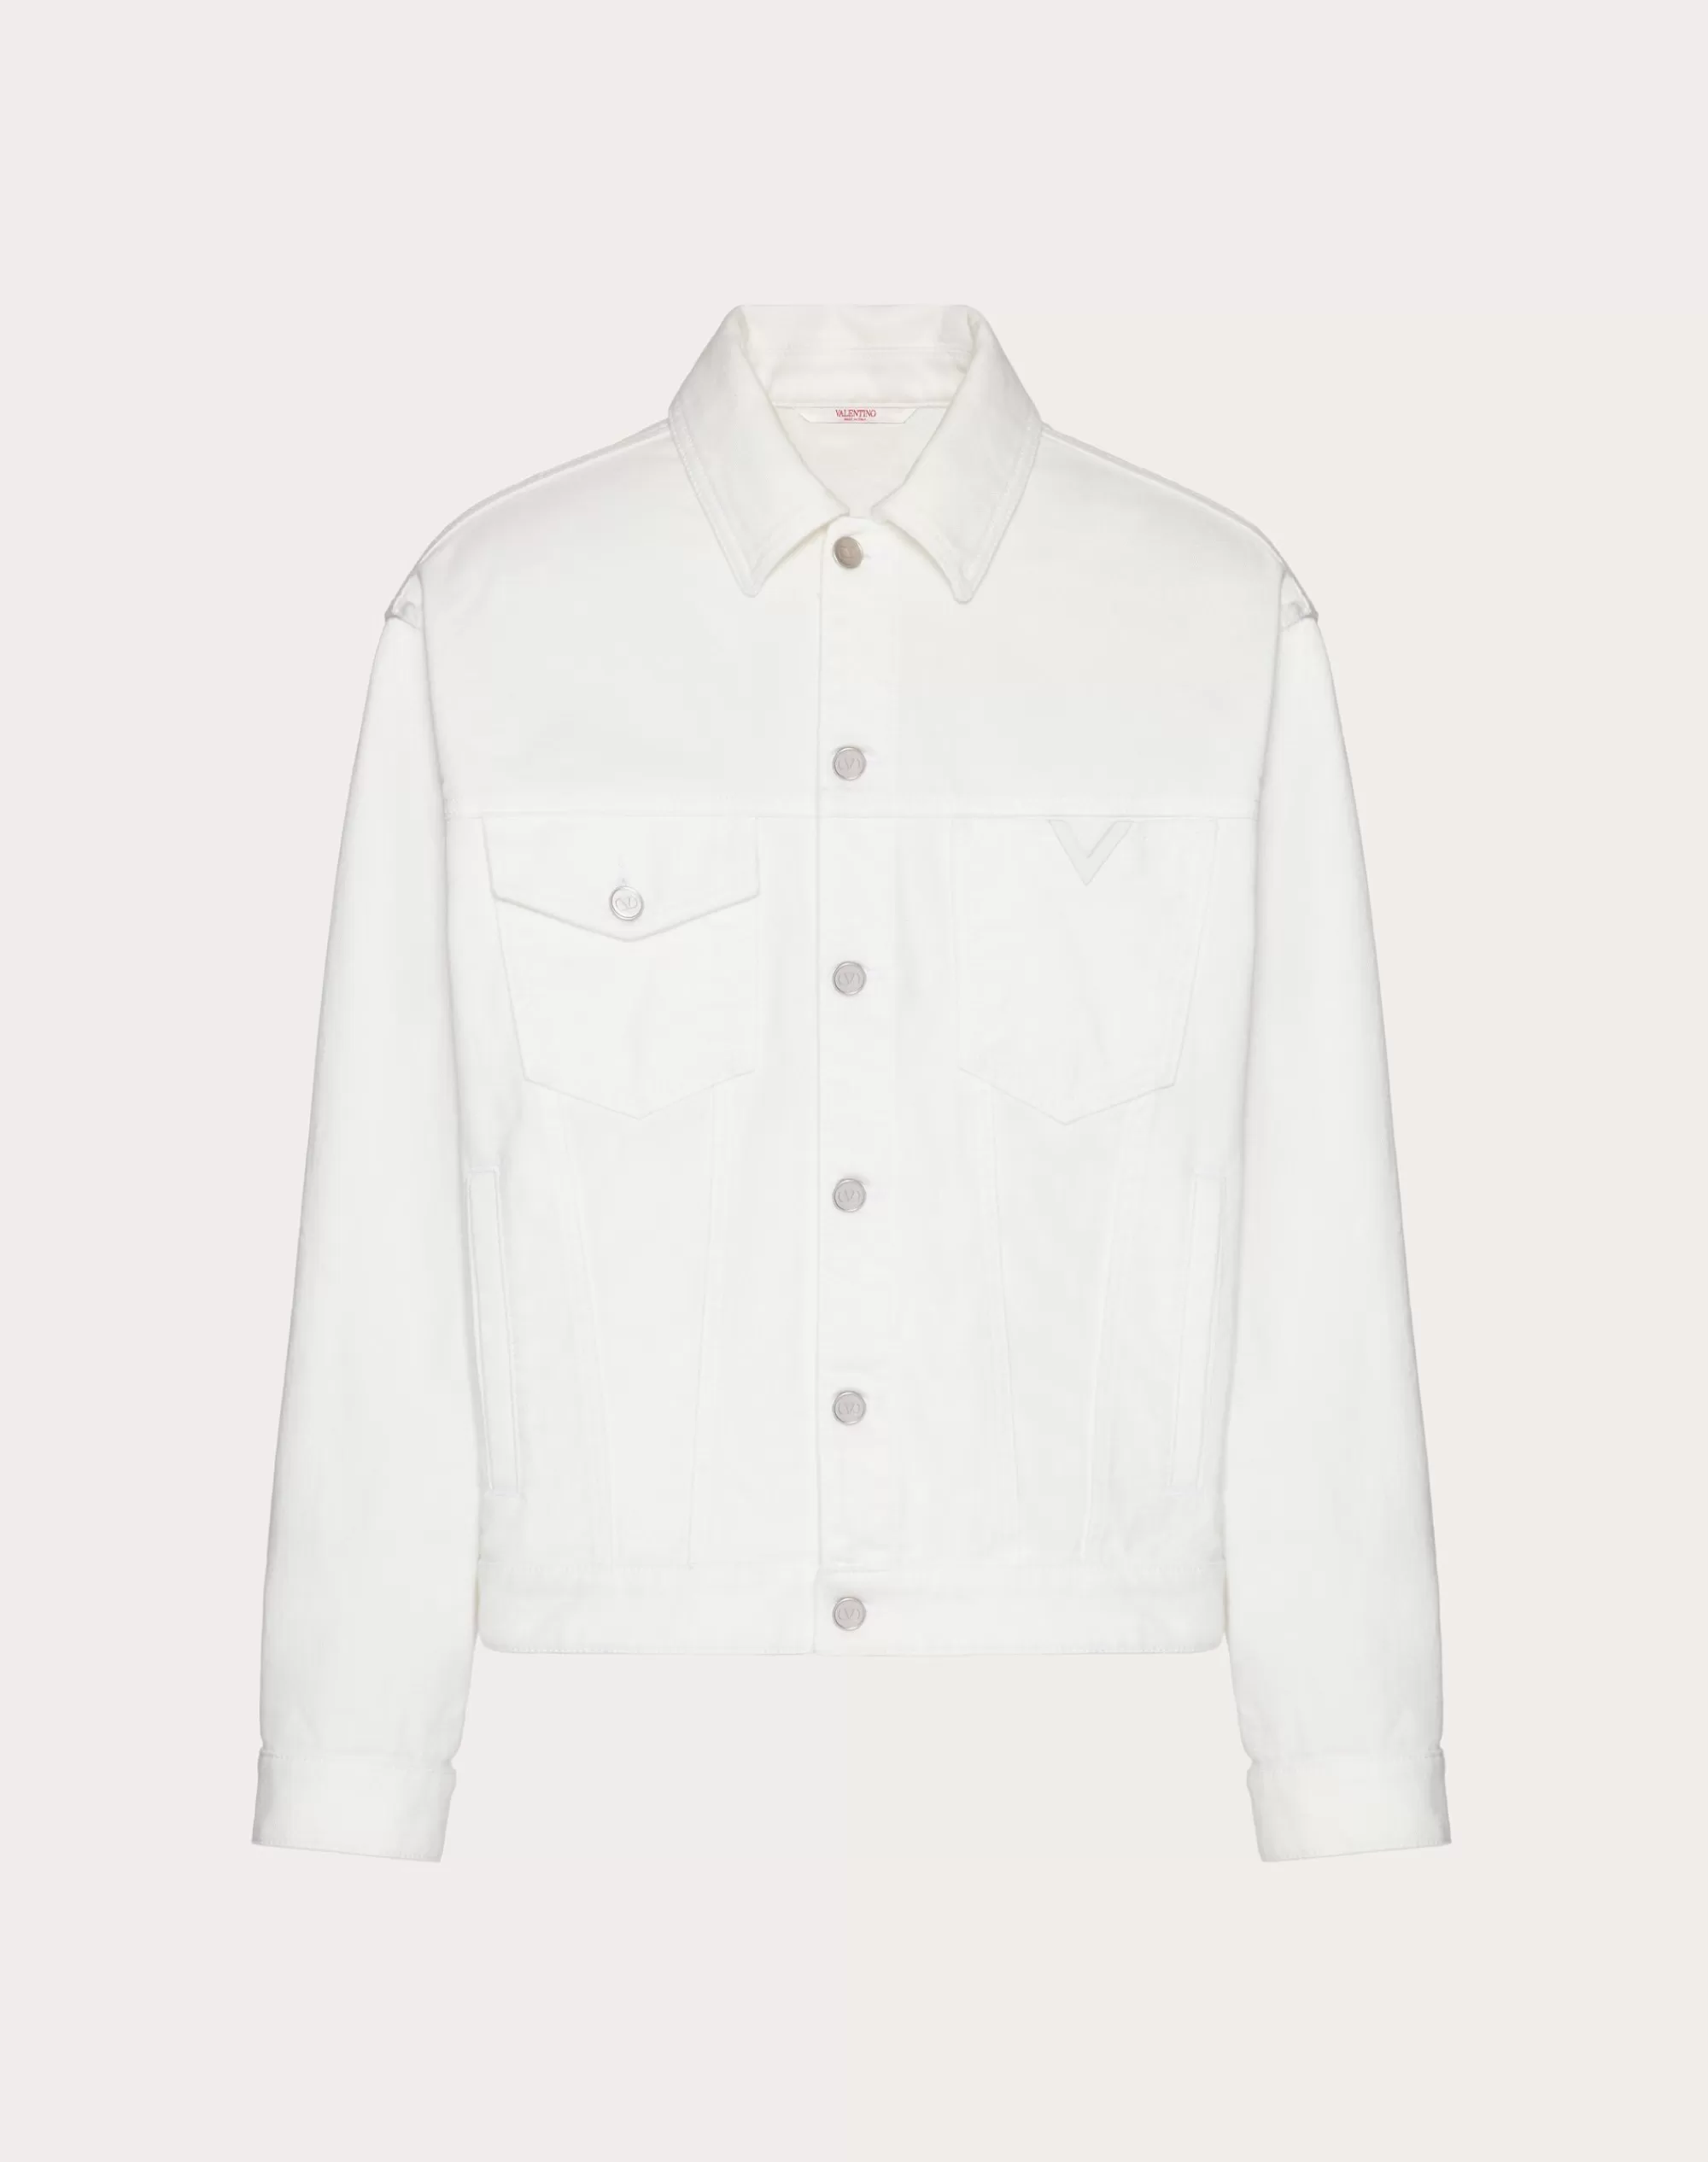 Valentino DENIM JACKET WITH RUBBERIZED V DETAIL Ivory Outlet